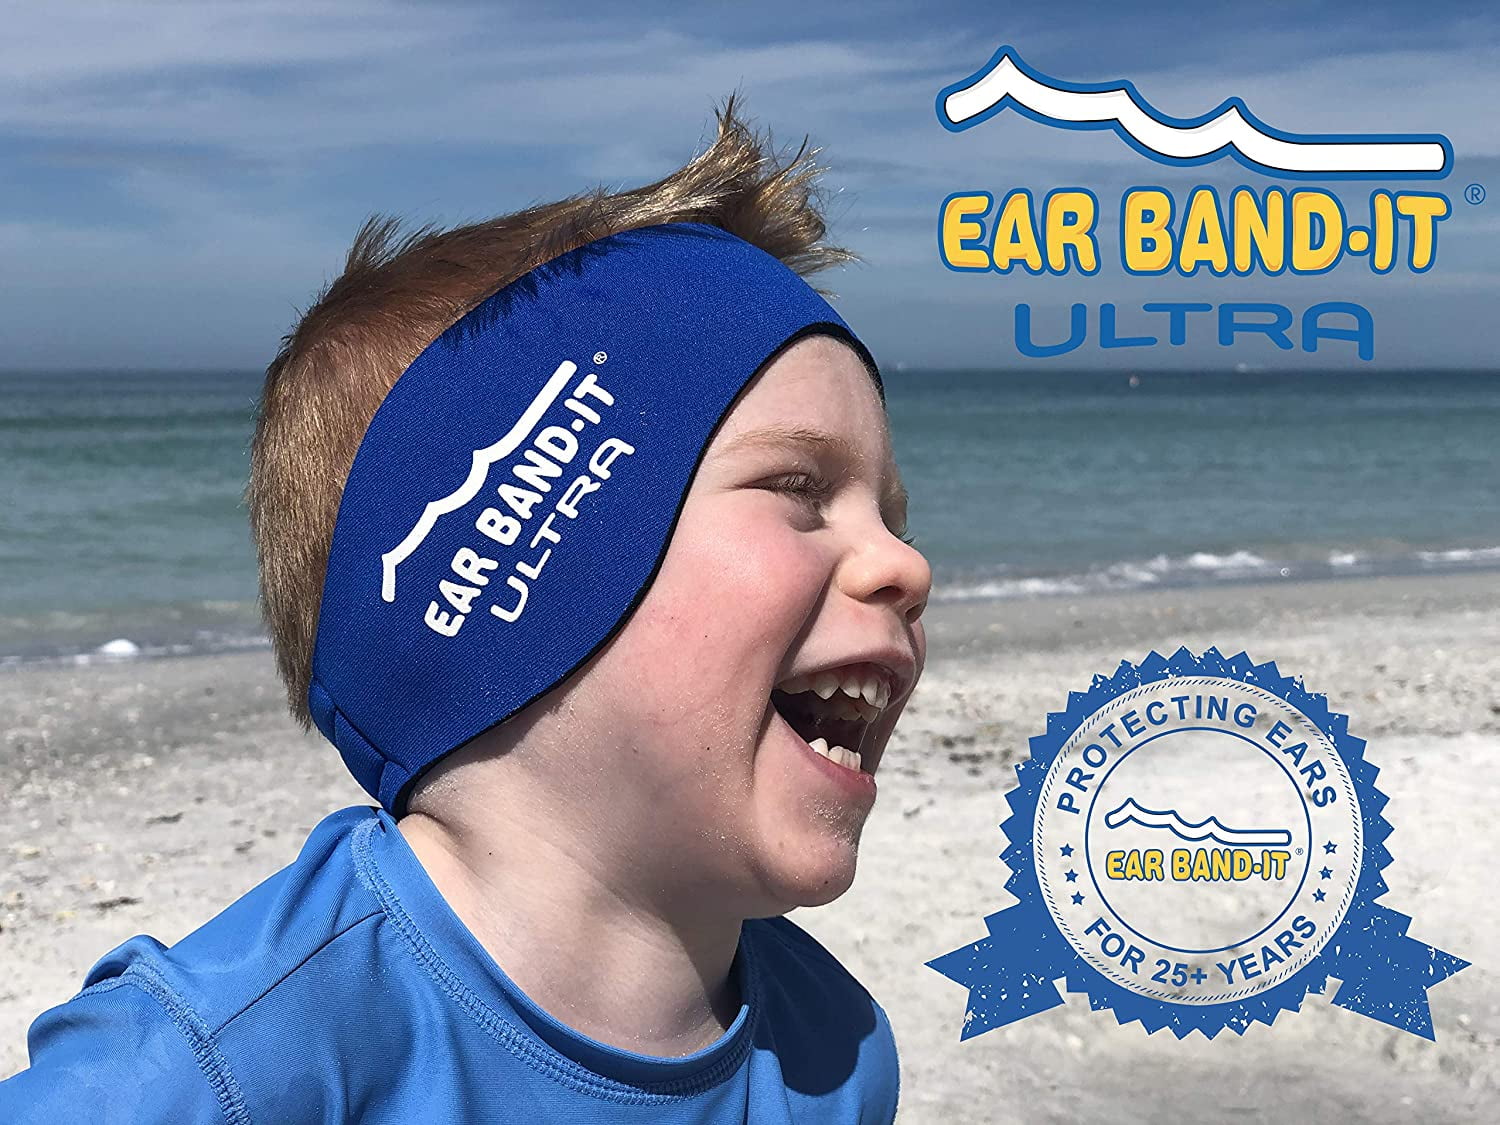 EAR BAND-IT Ultra Tie Dye Swimming Headband – ONLY Swim Ear Band Invented by ENT Doctor – Block Water Secure Earplugs – Kid & Adult Sizes – Recommended Water Protection for Bath Pool Shower Beach